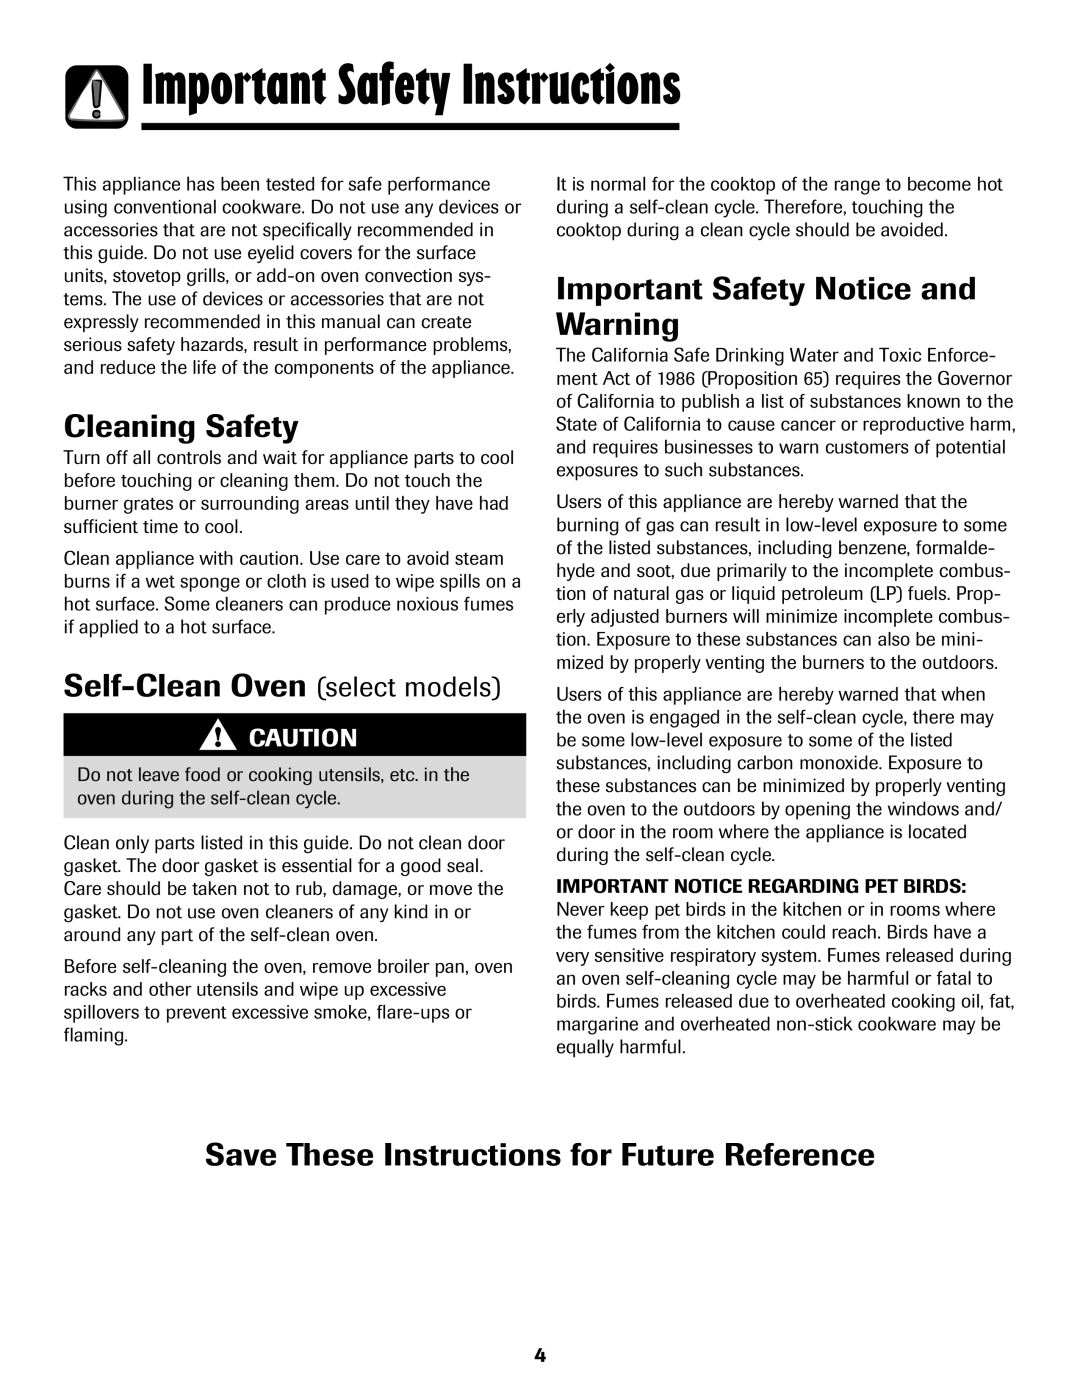 Maytag 8113P424-60 manual Cleaning Safety, Important Safety Notice and Warning, Self-Clean Oven select models 